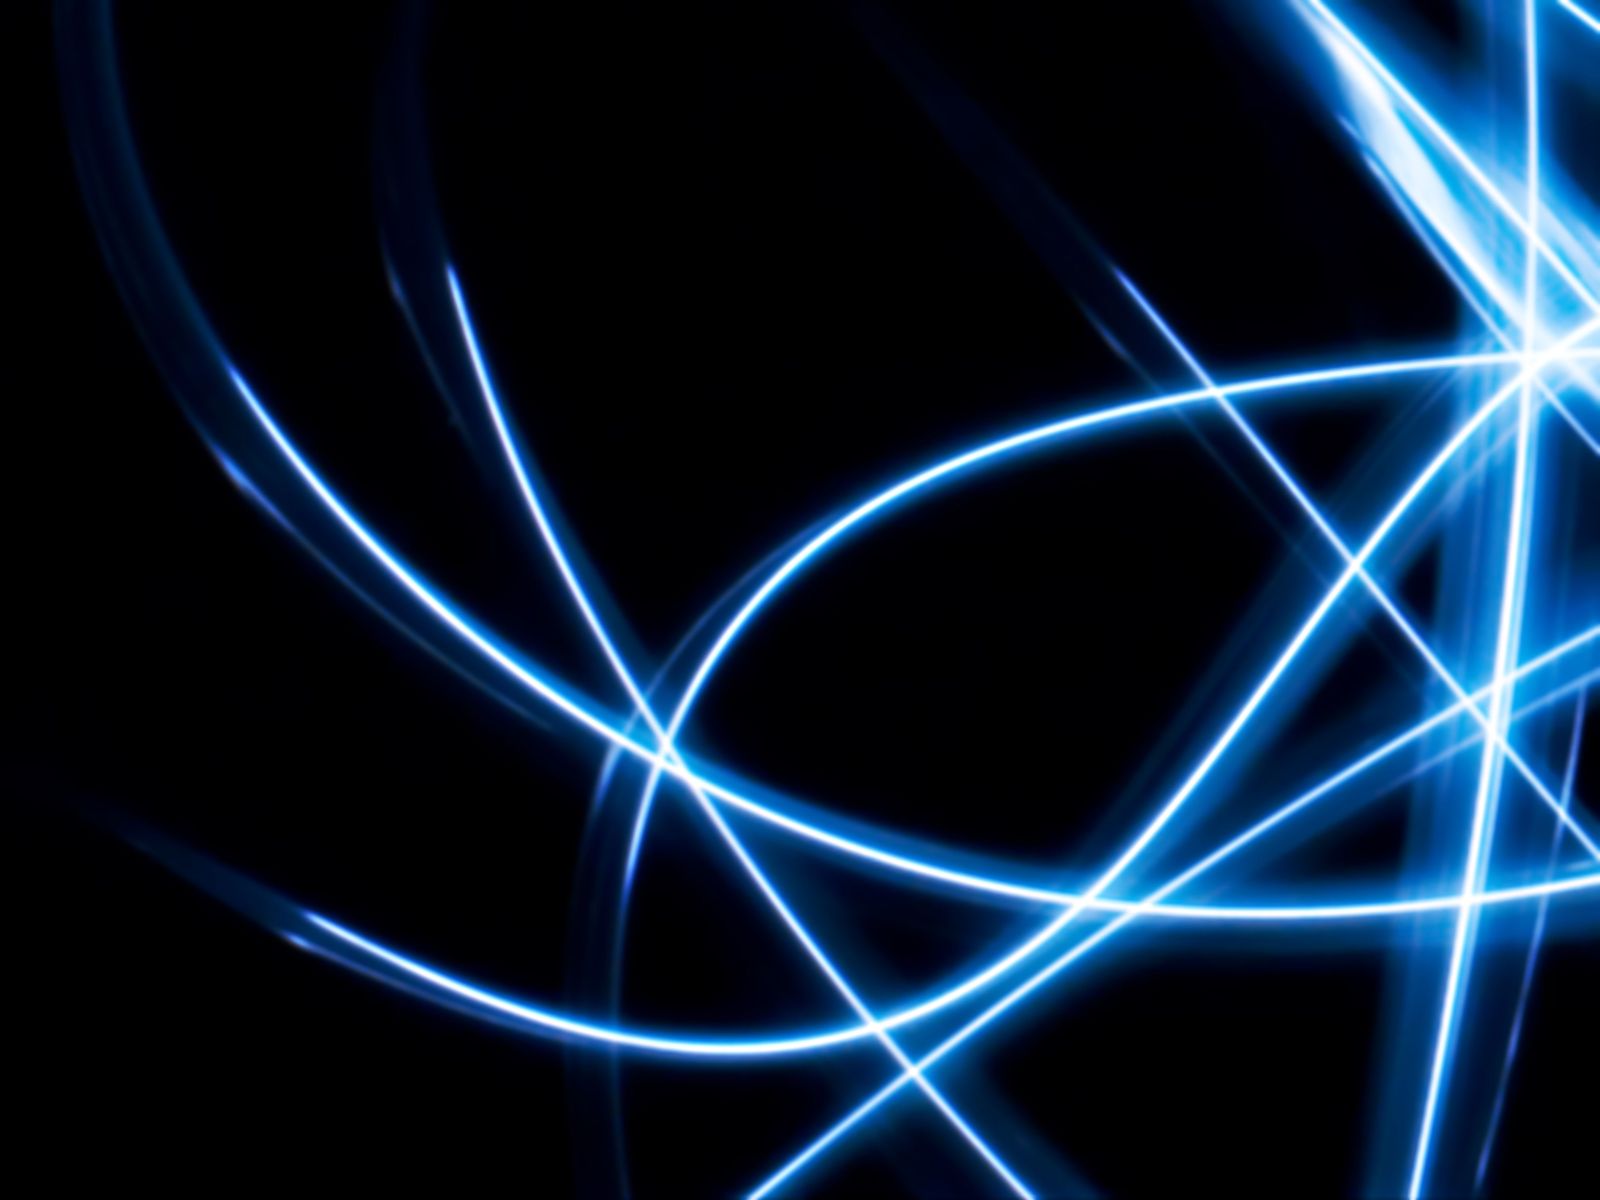 a very blue glowing background with an elegant swirl